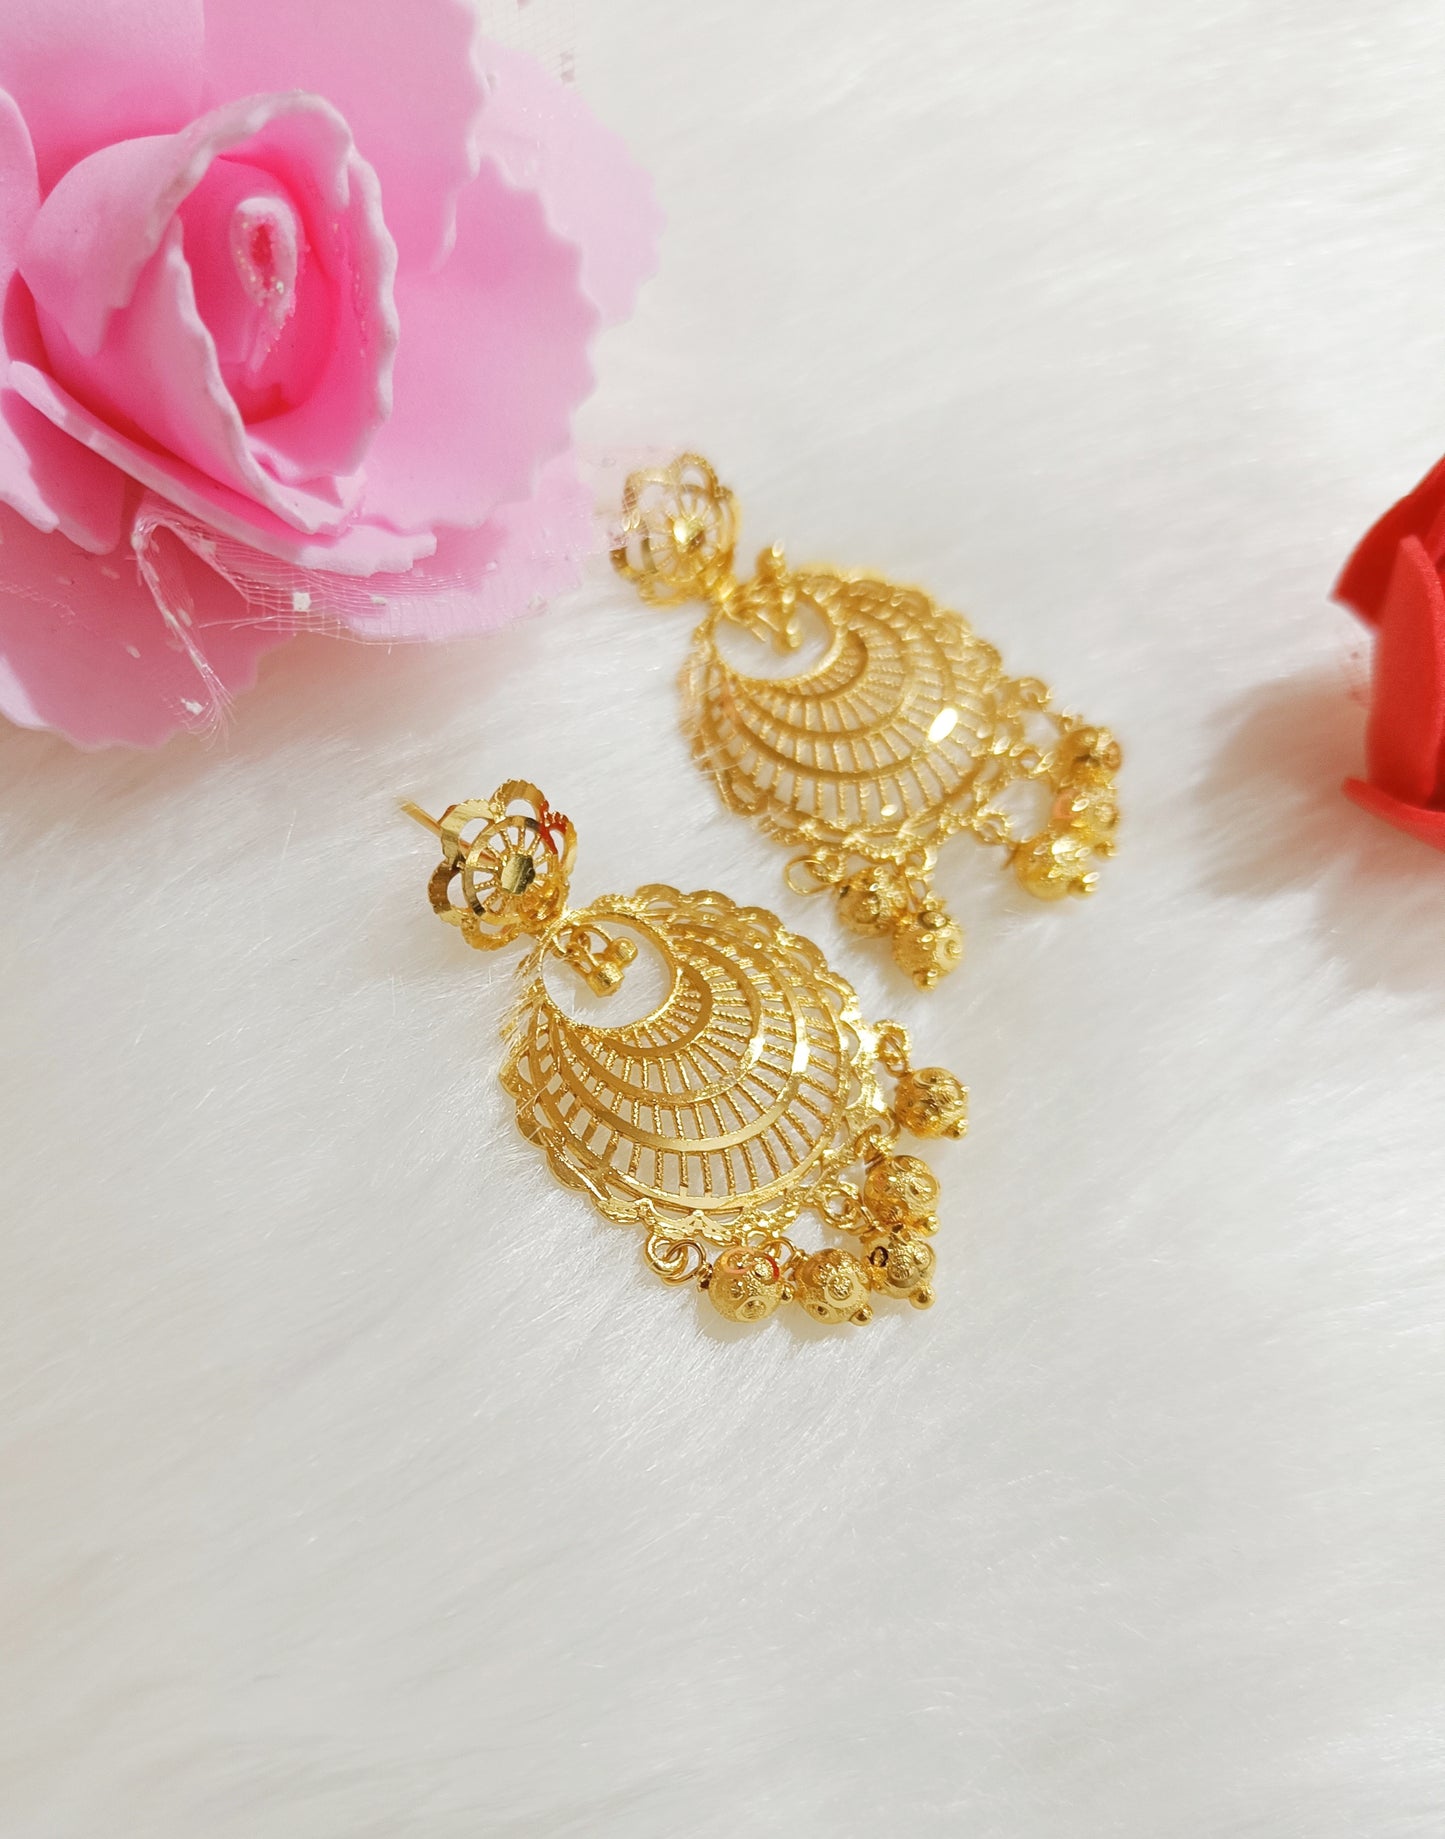 up to 1 Gram Gold Forming Chand Bali Design Ear Rings